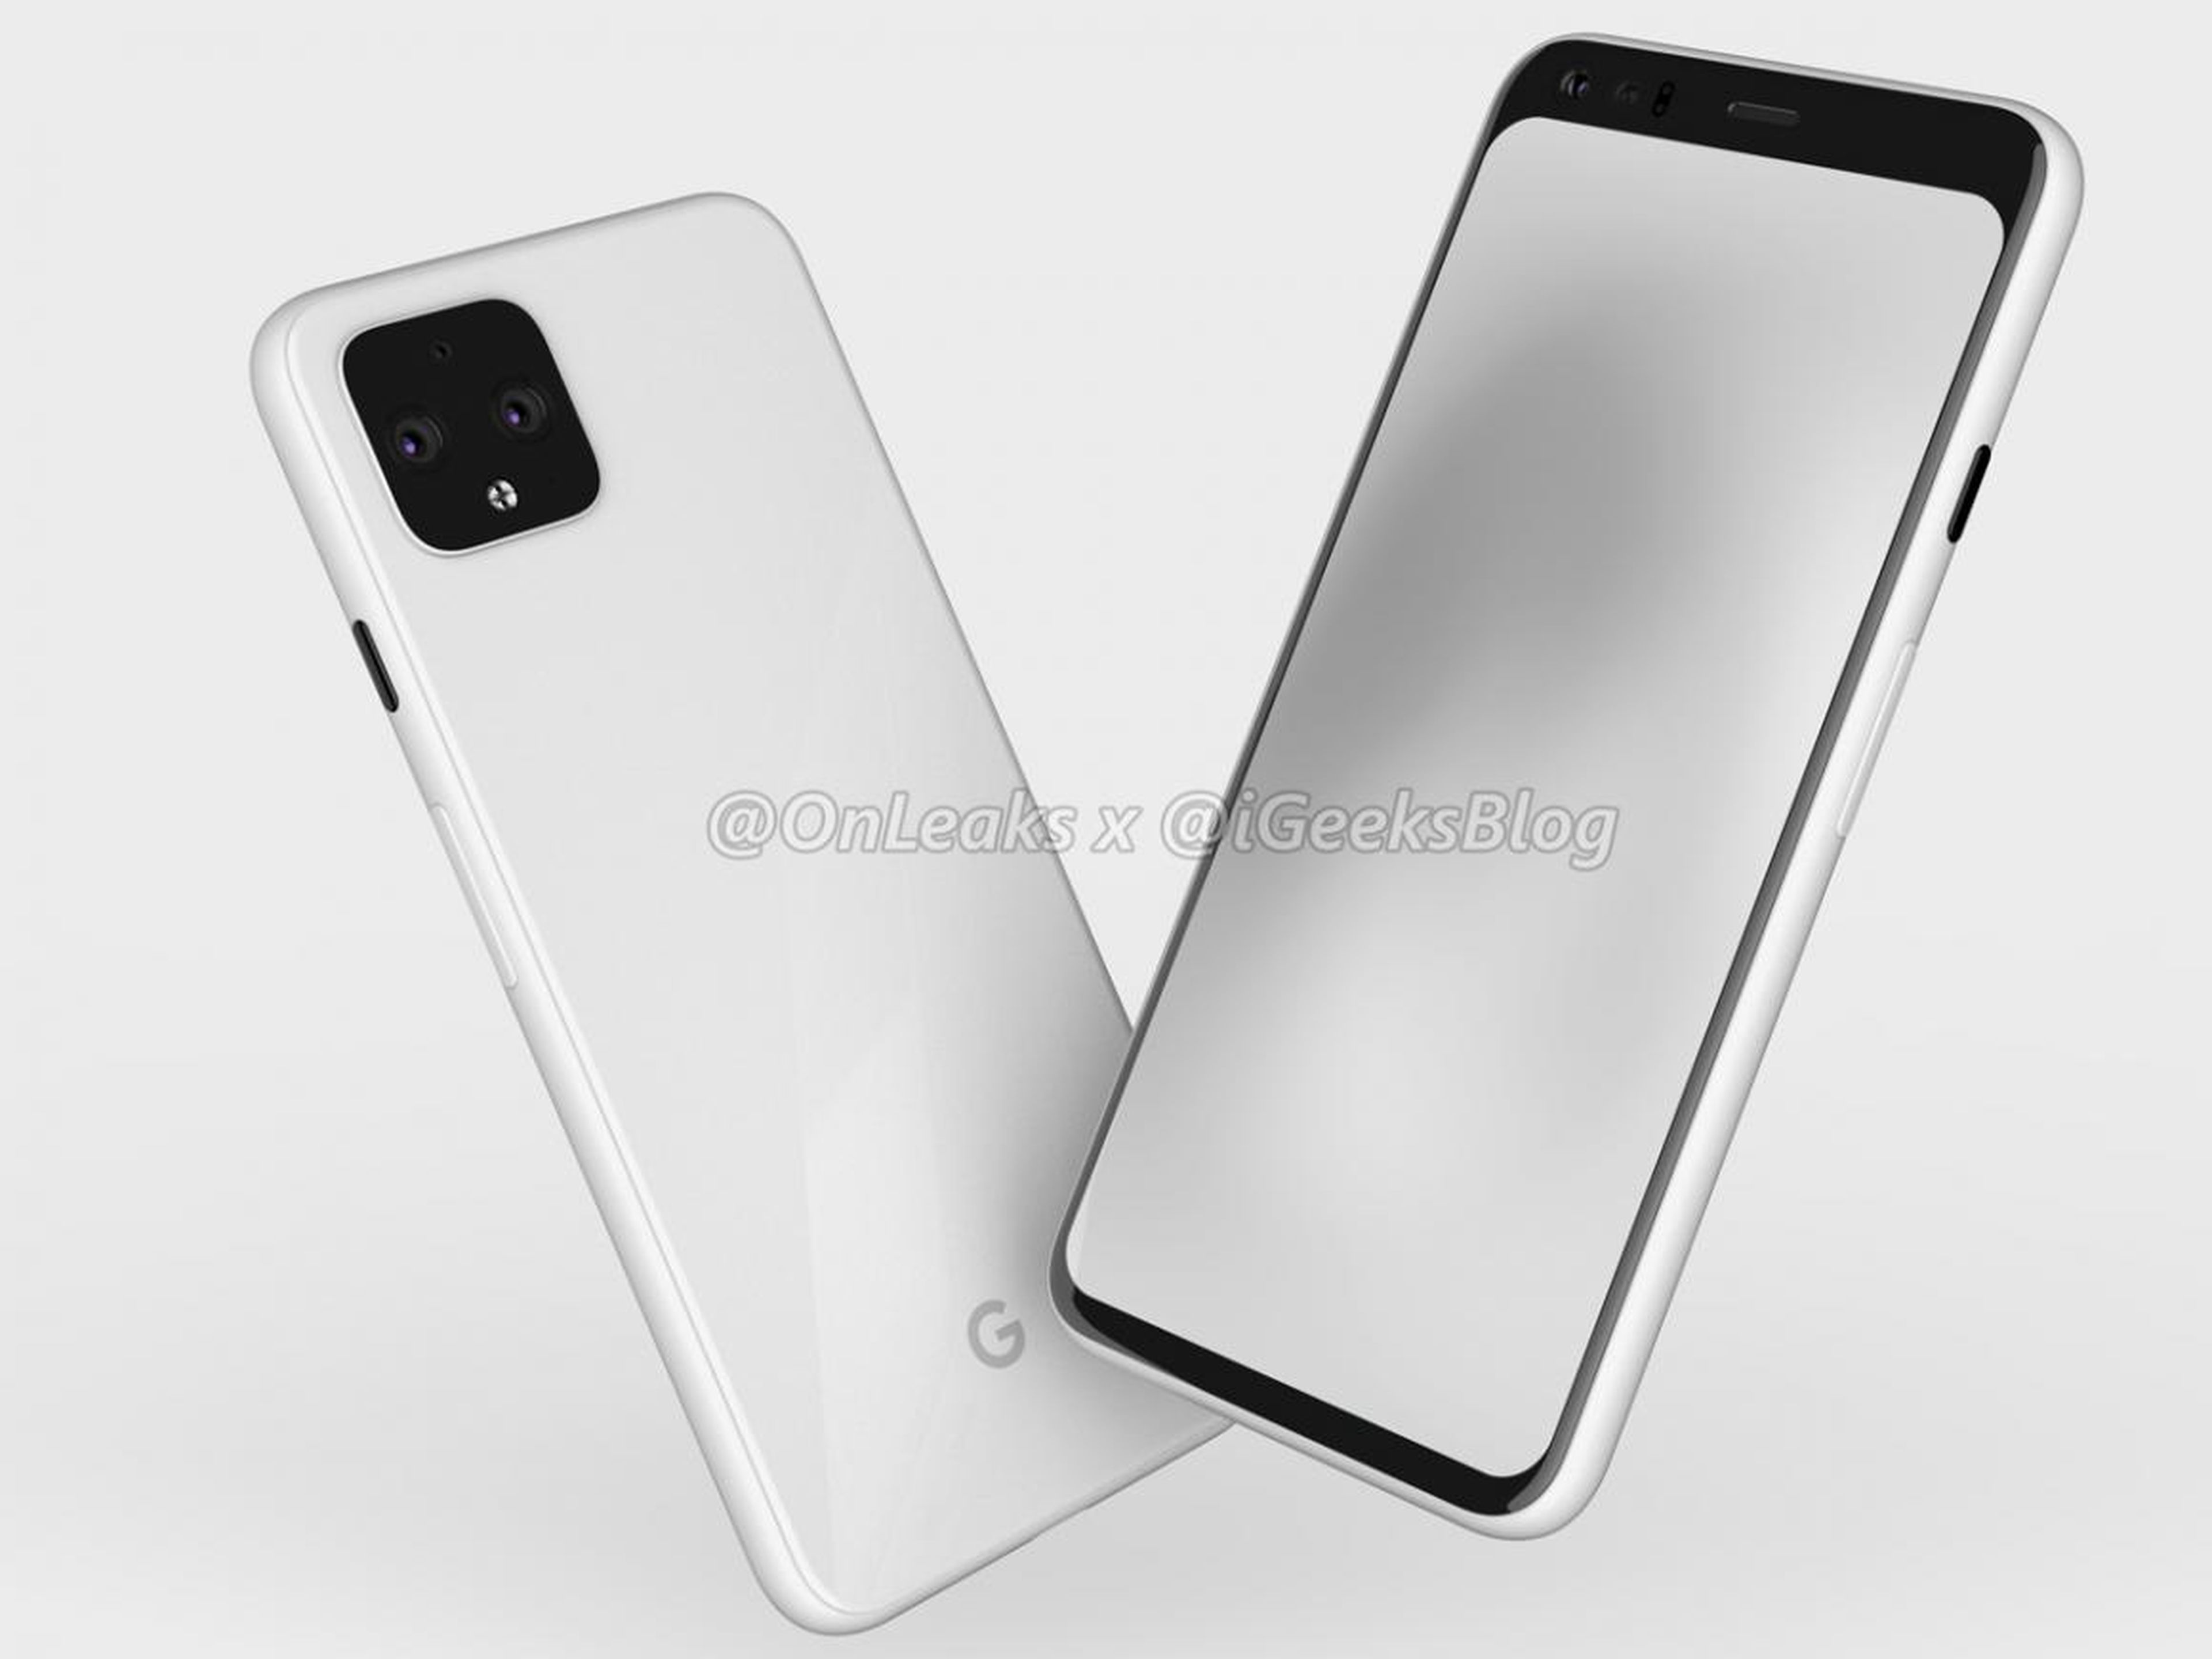 Here are renders supposedly showing the front of the Pixel 4.